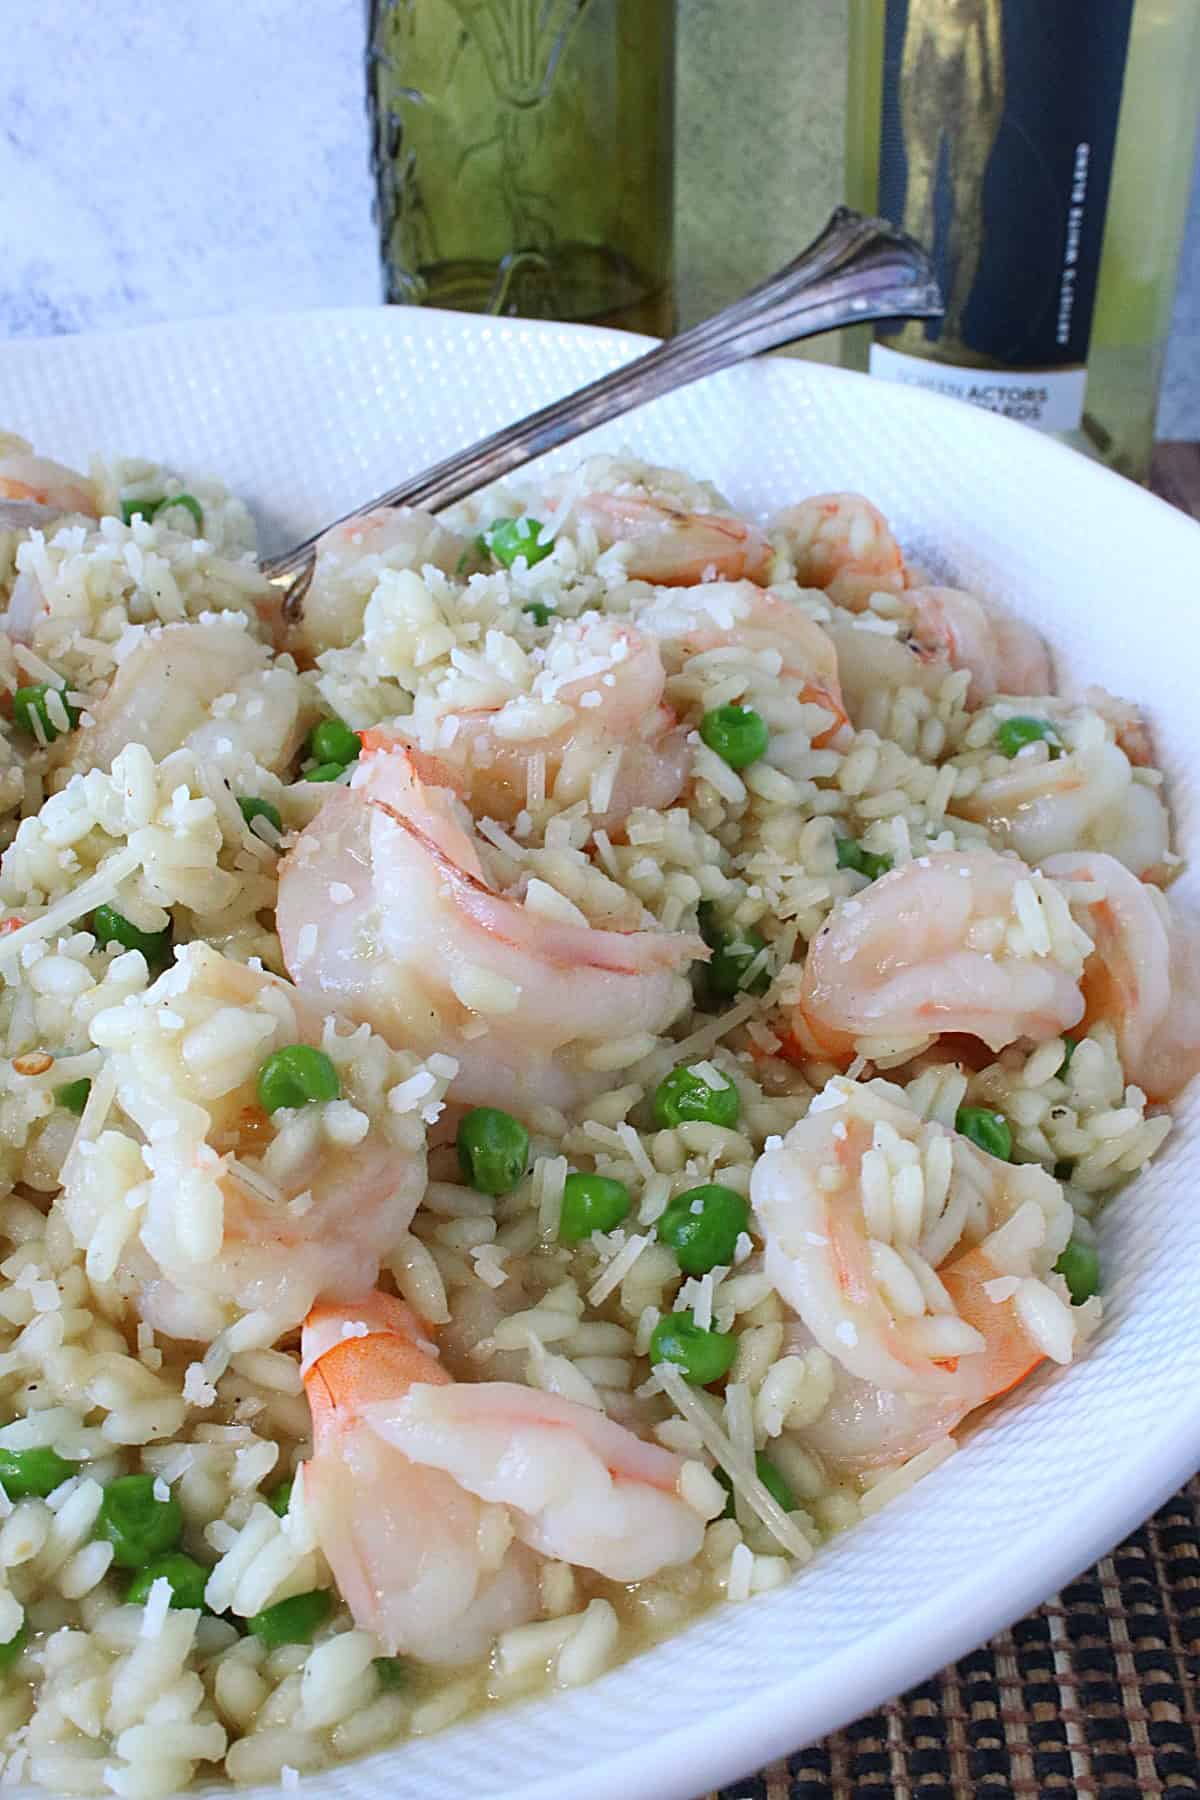 Shrimp scampi risotto with pink shrimp and peas in a white bowl with a spoon.